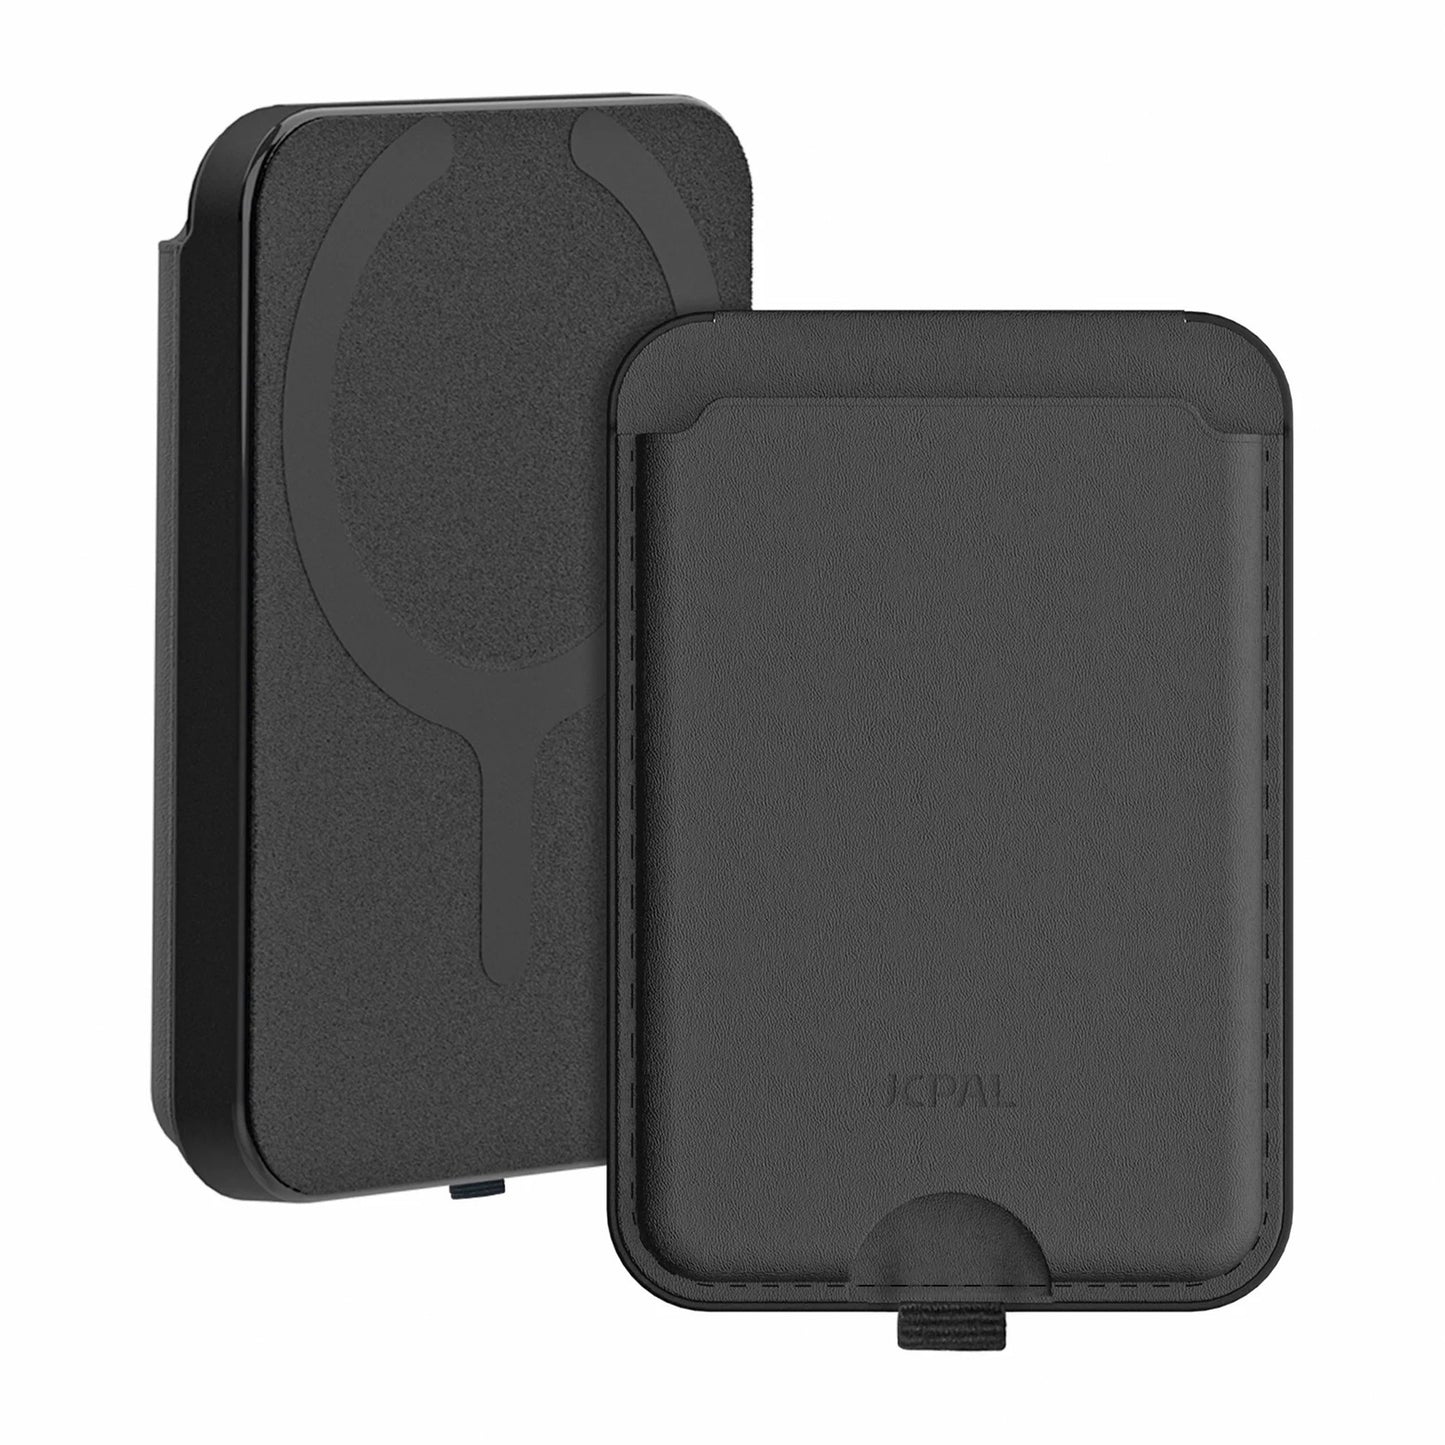 Universal JCPal Cove MagSafe Wallet Stand - Black - 15-11951